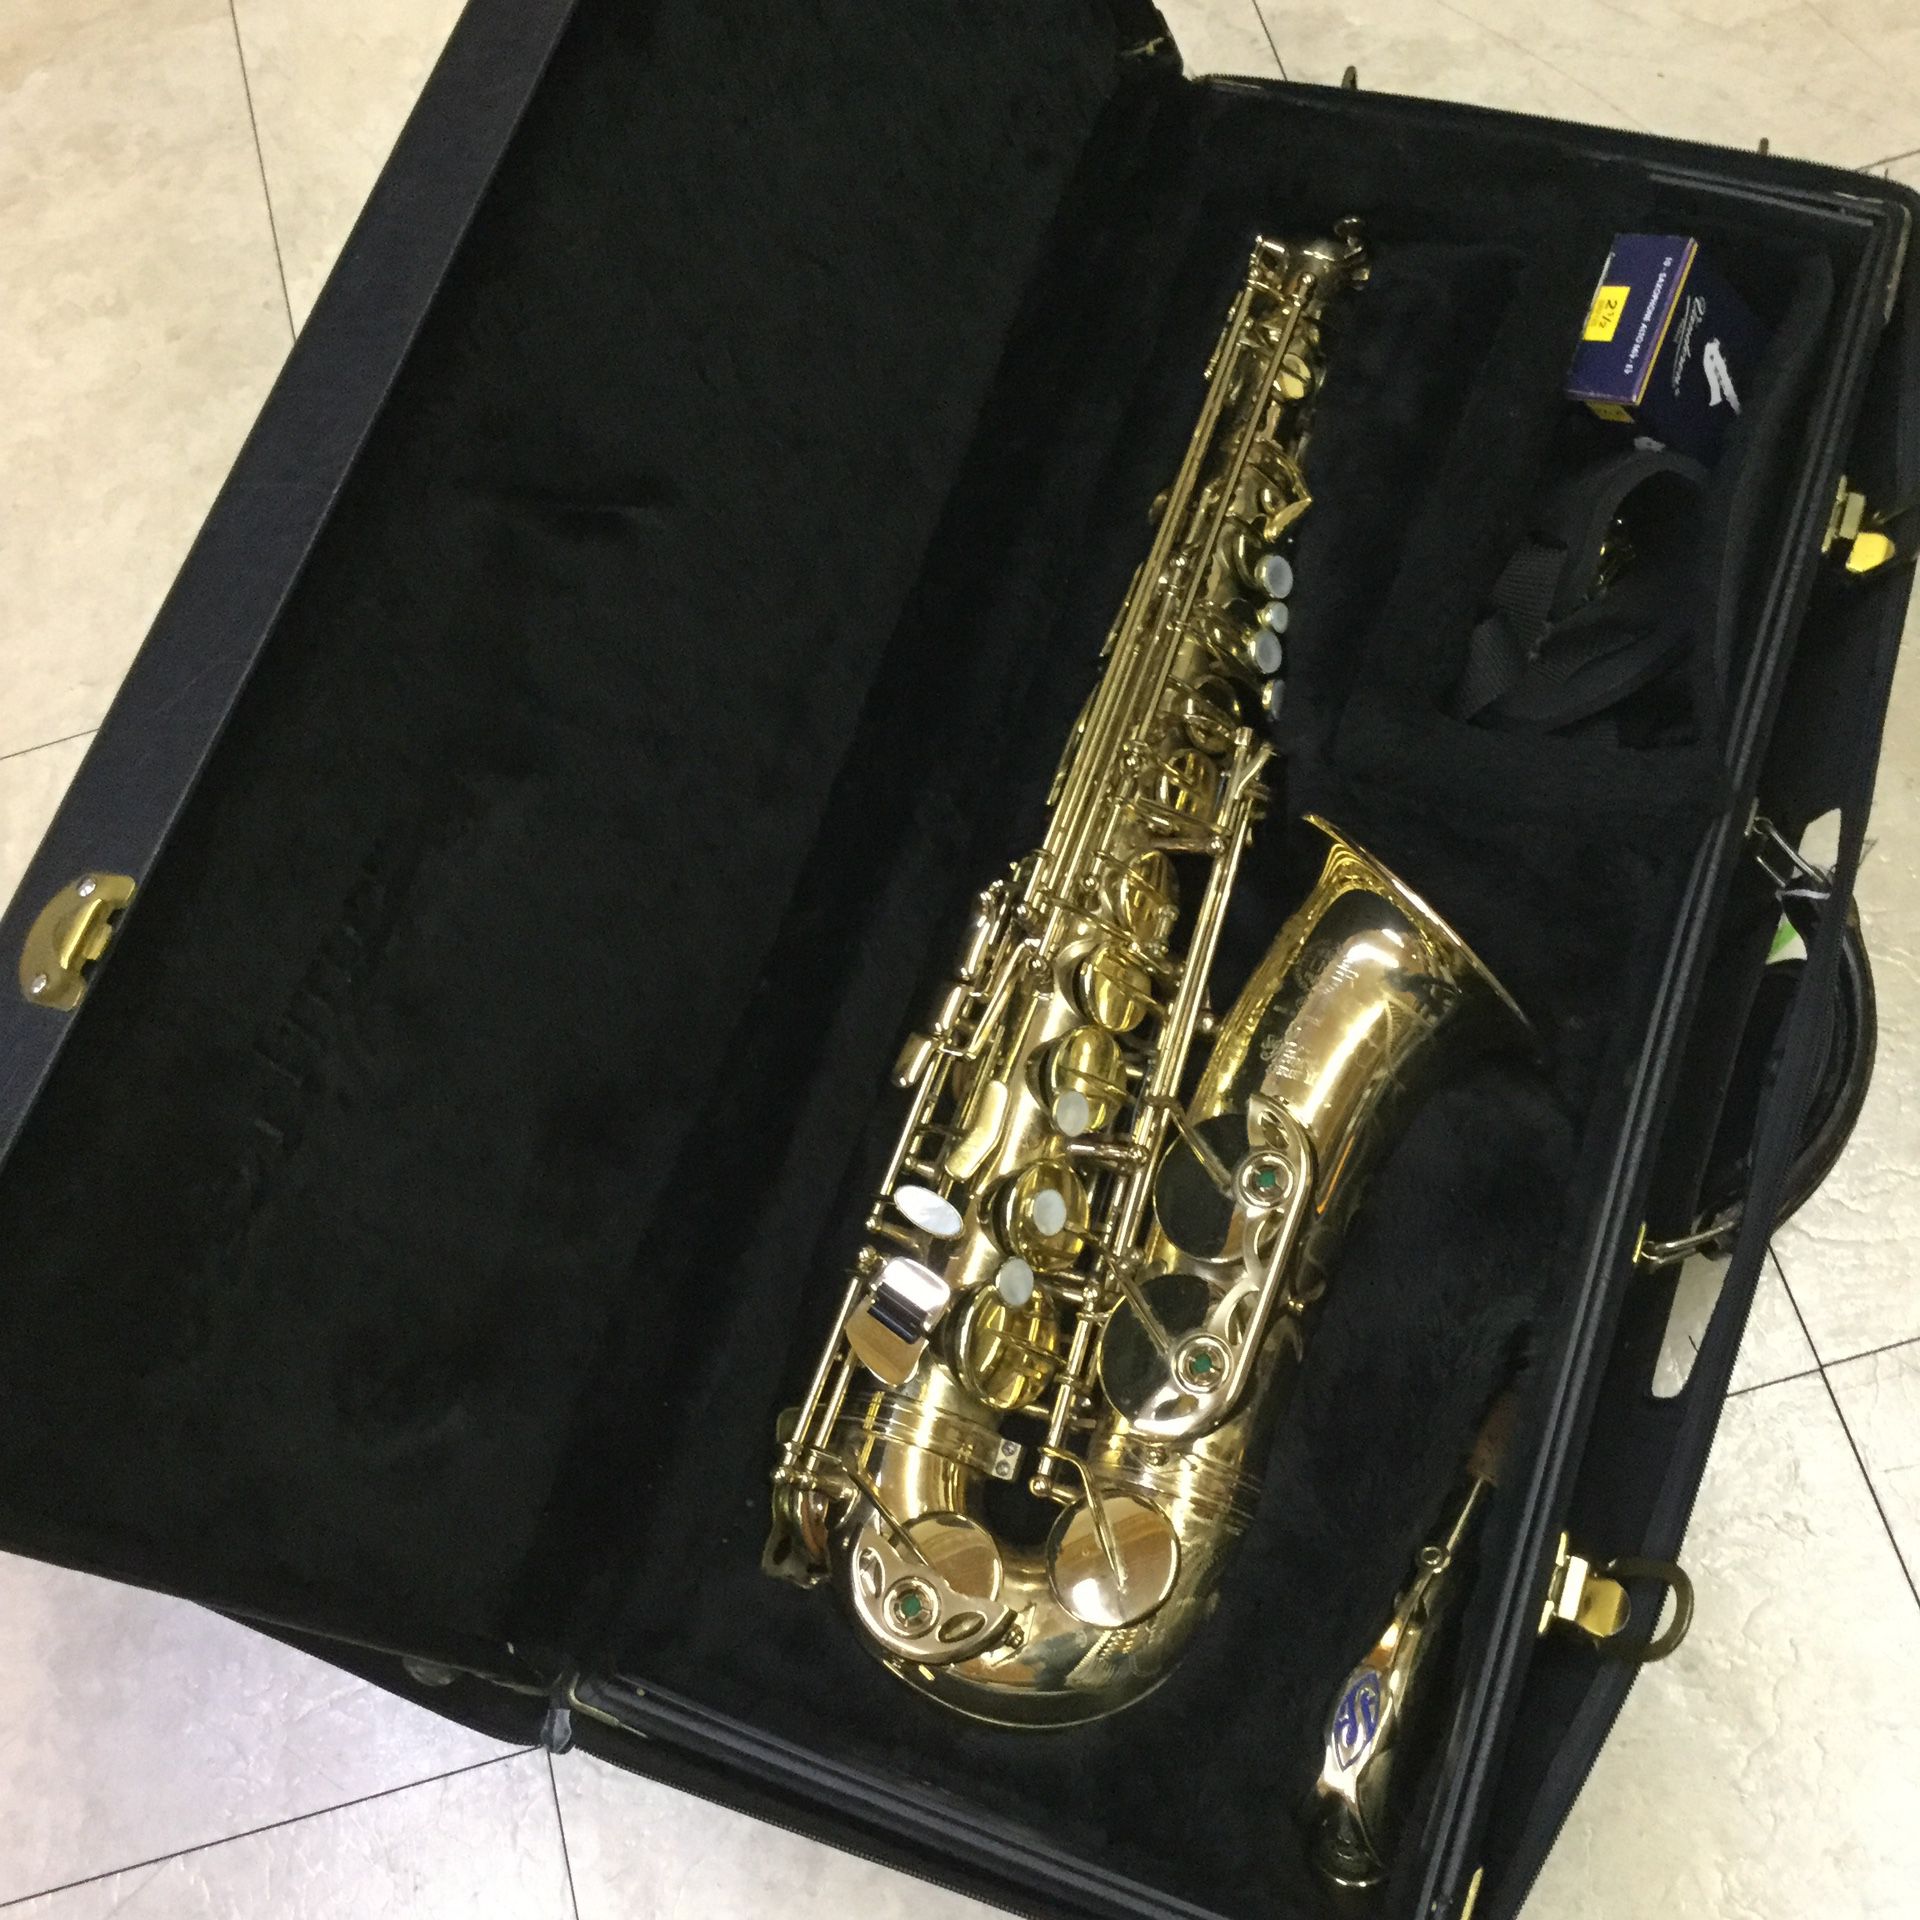 Selmer 80 Super Action Series II Alto Saxophone with Cases - $3,950